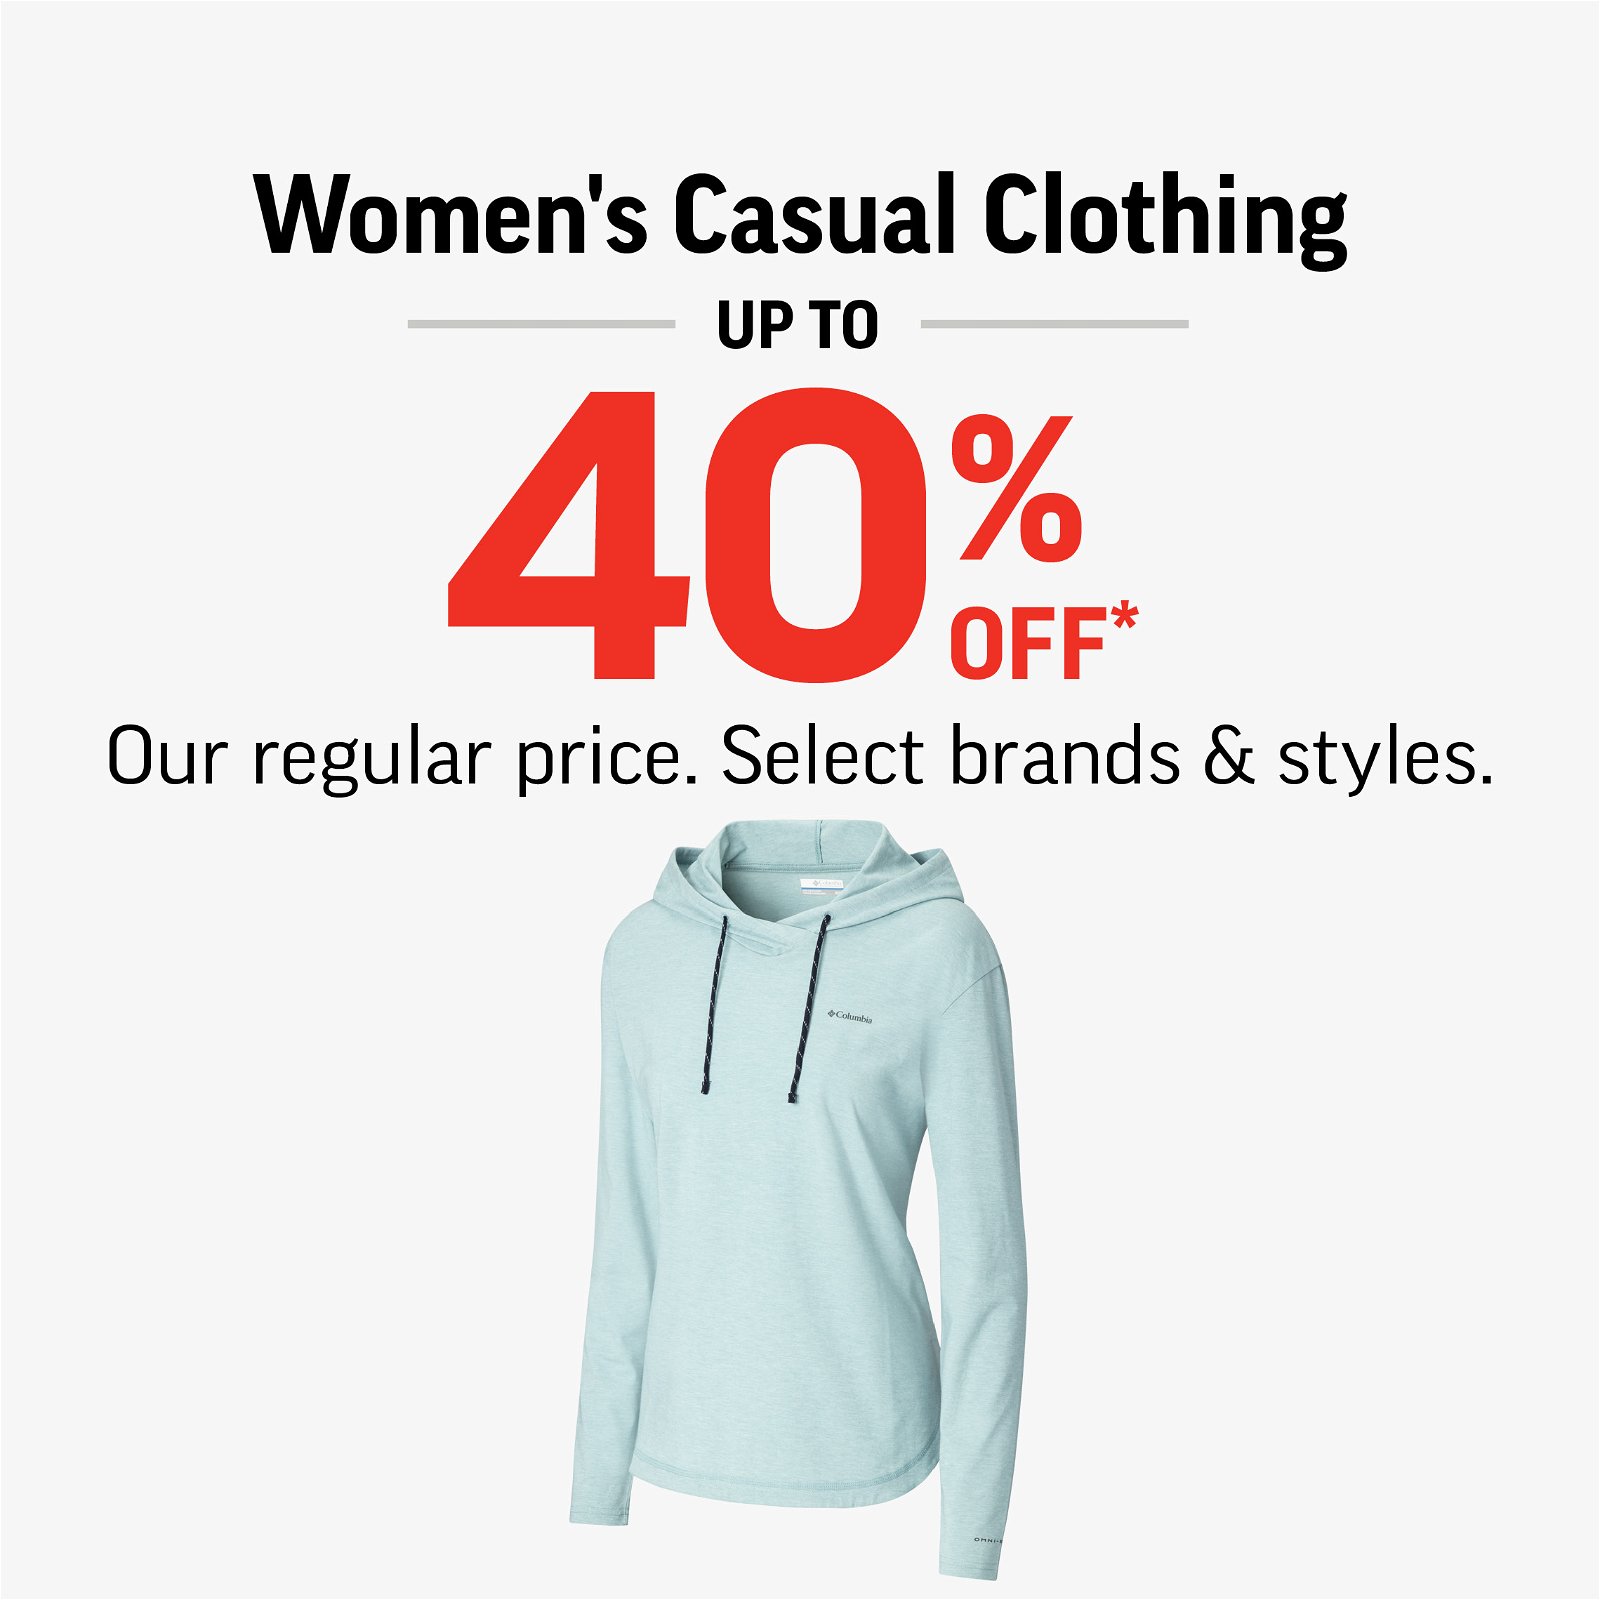 WOMEN'S CASUAL CLOTHING UP TO 40% OFF